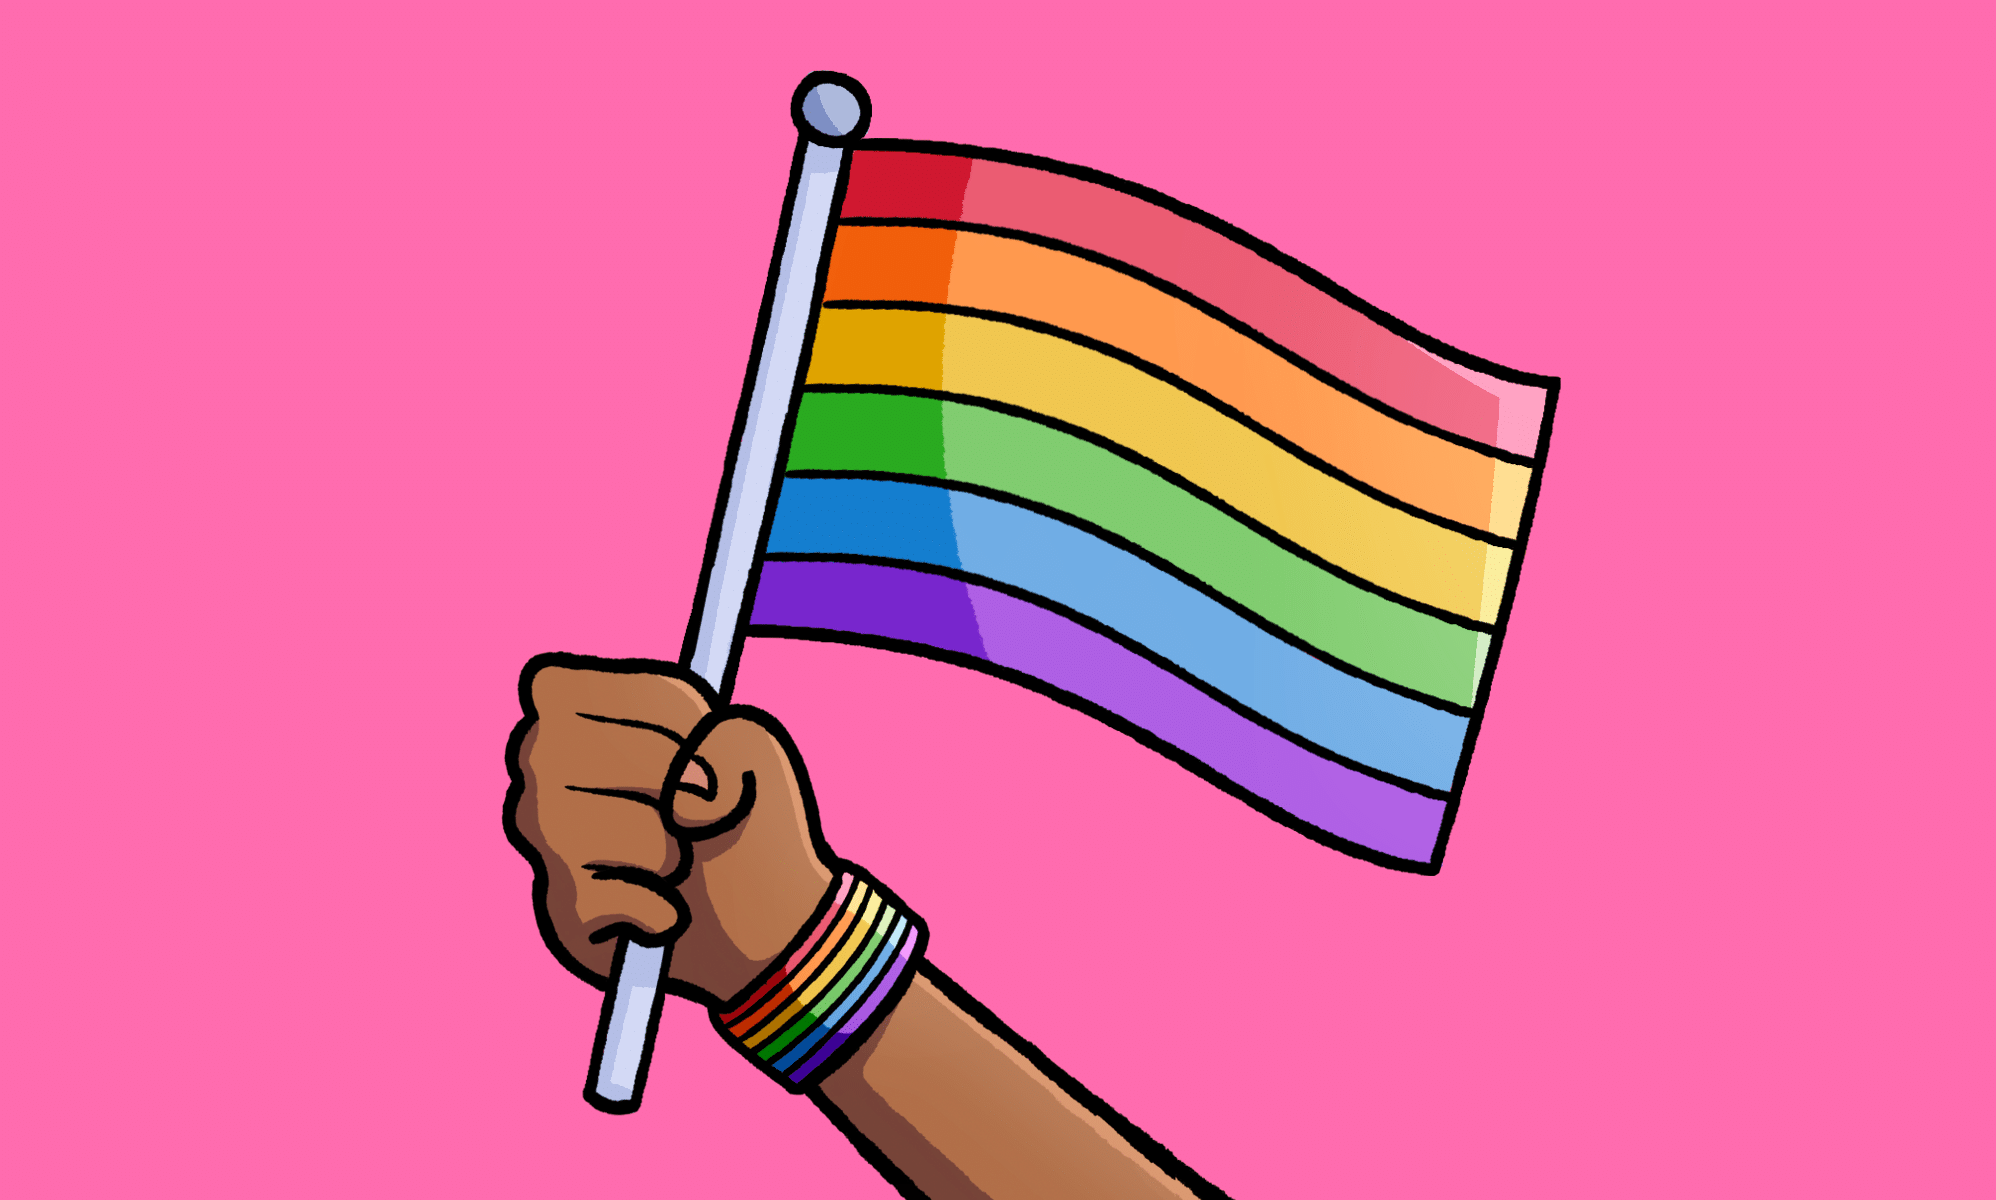 Love wins: The unsung heroes to thank for equality